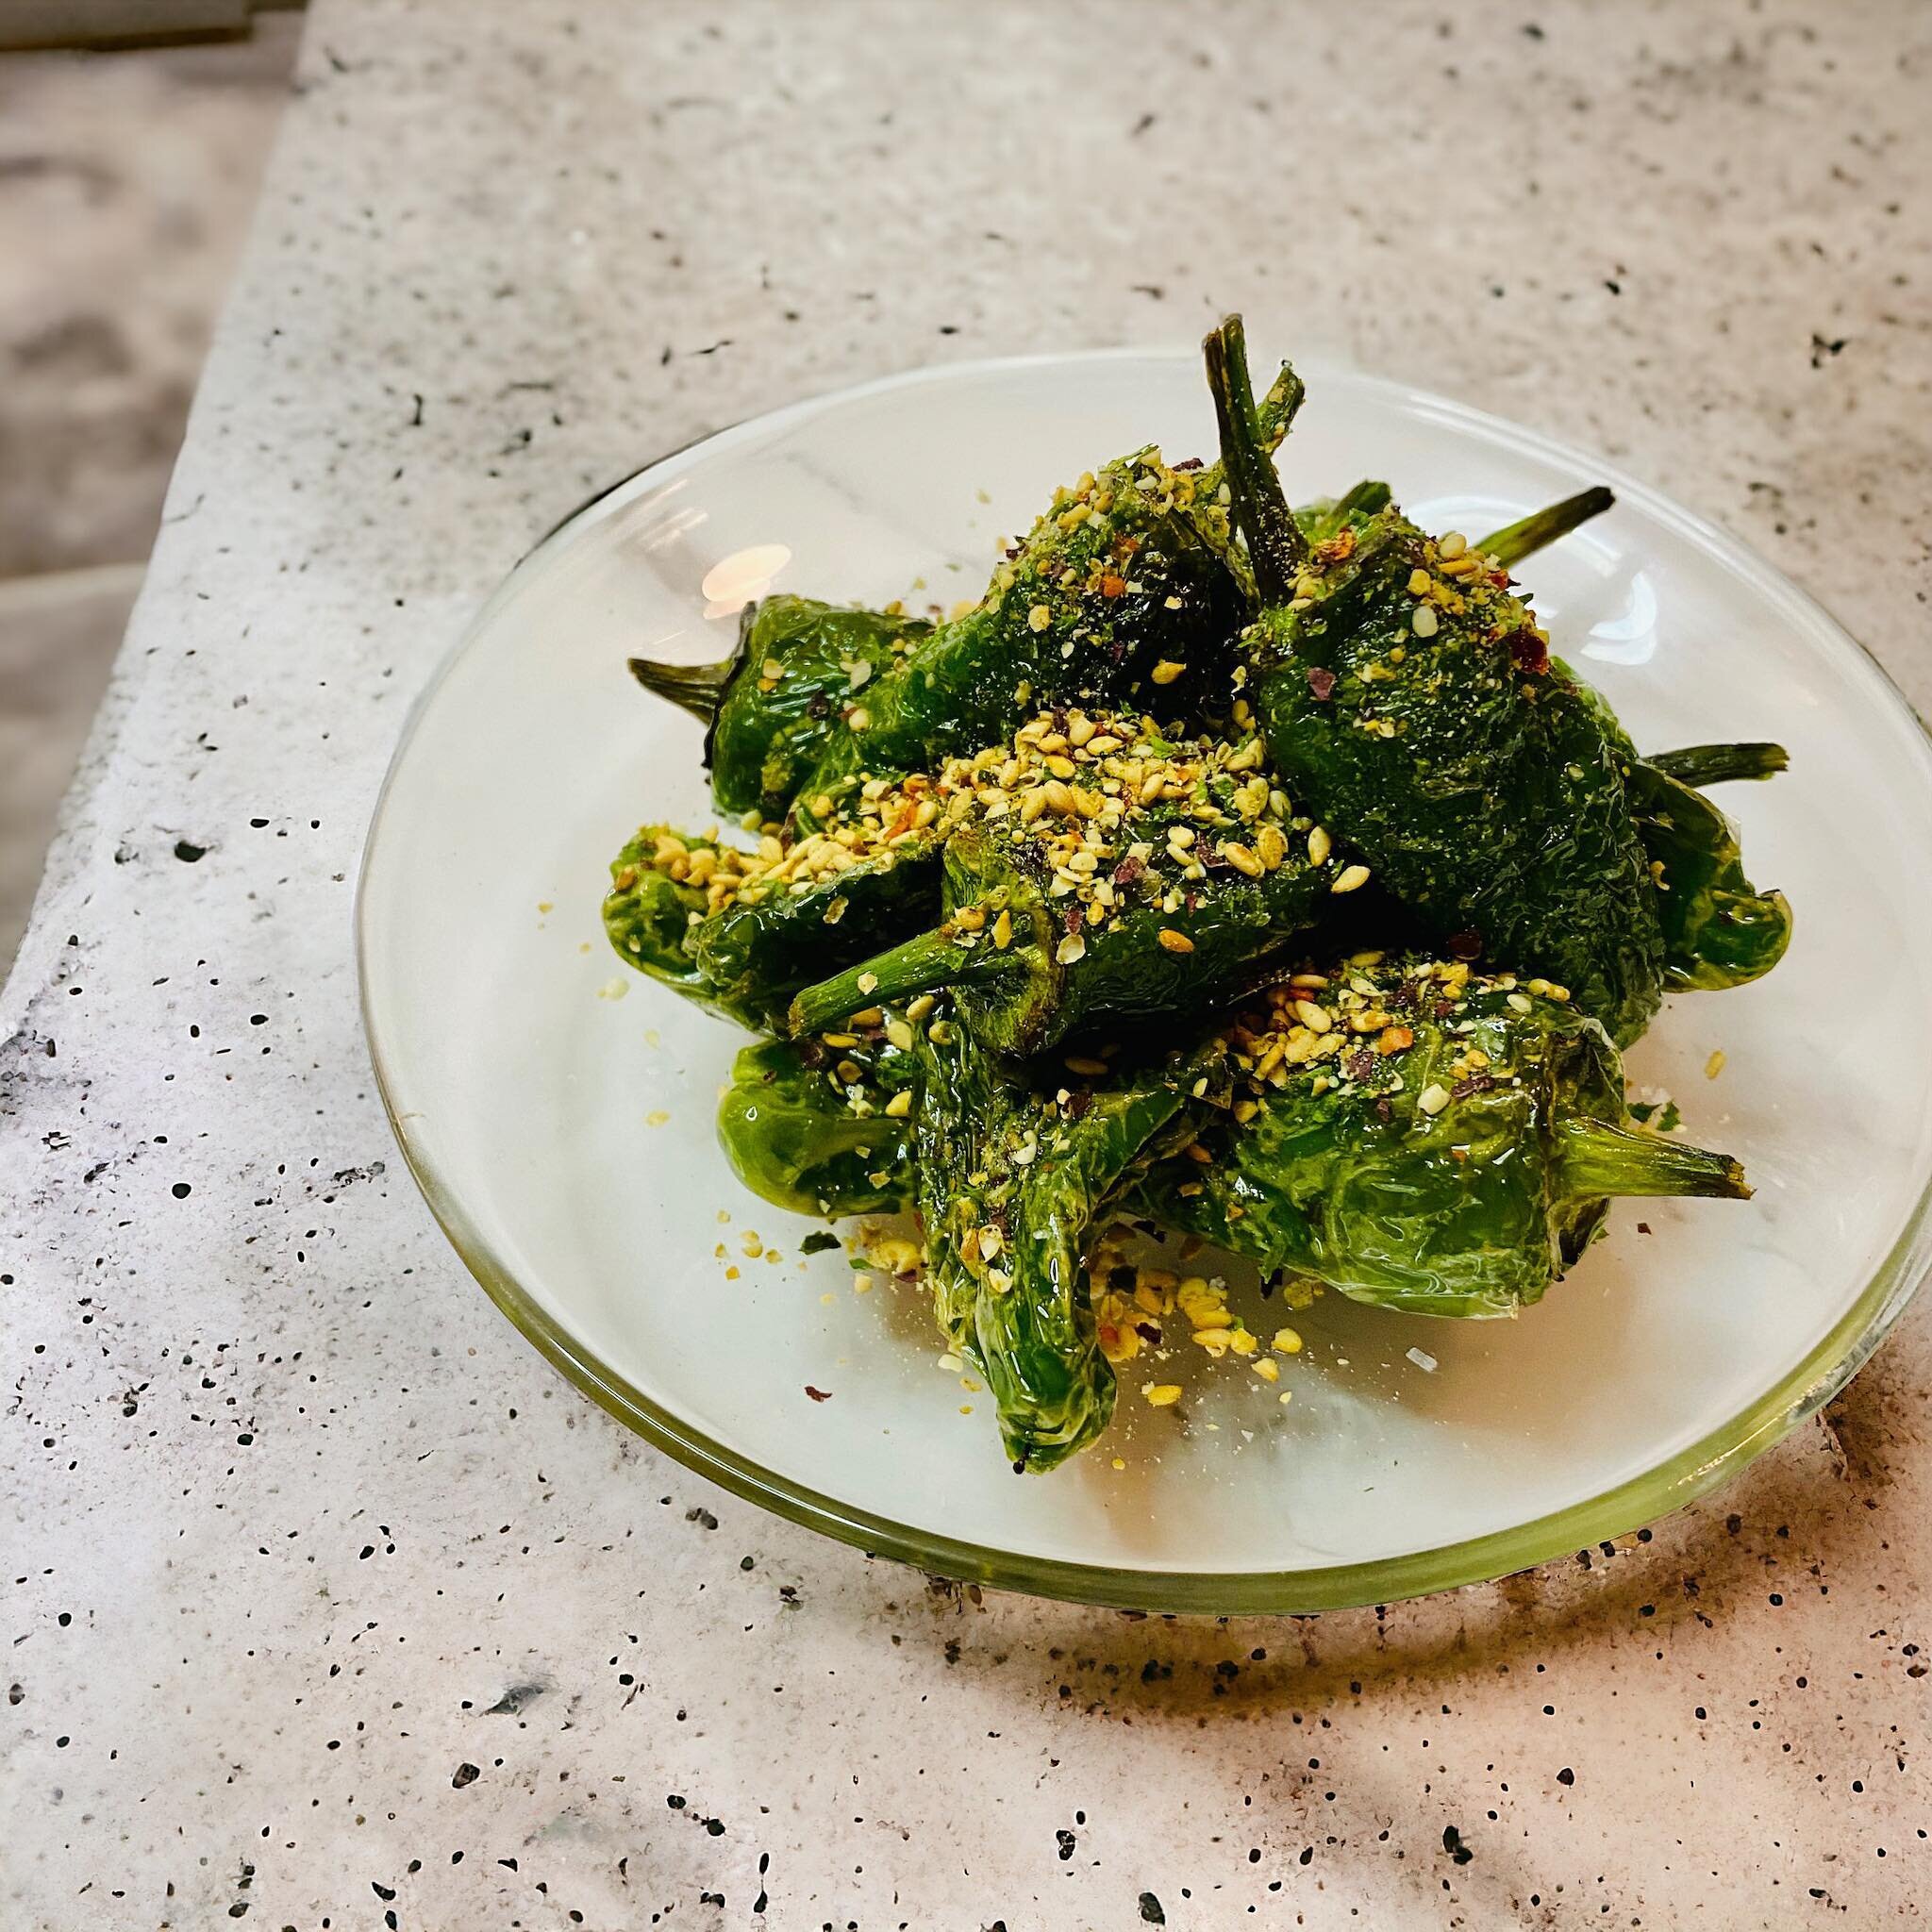 Padron peppers + Nori Goma Japanese seasoning 

Yum

#nori #norigoma #japanesefood #japaneseflavours #lovejapanesefood #spices #spiceblends #madeinuk #buckinghamshire #madeinwycombe